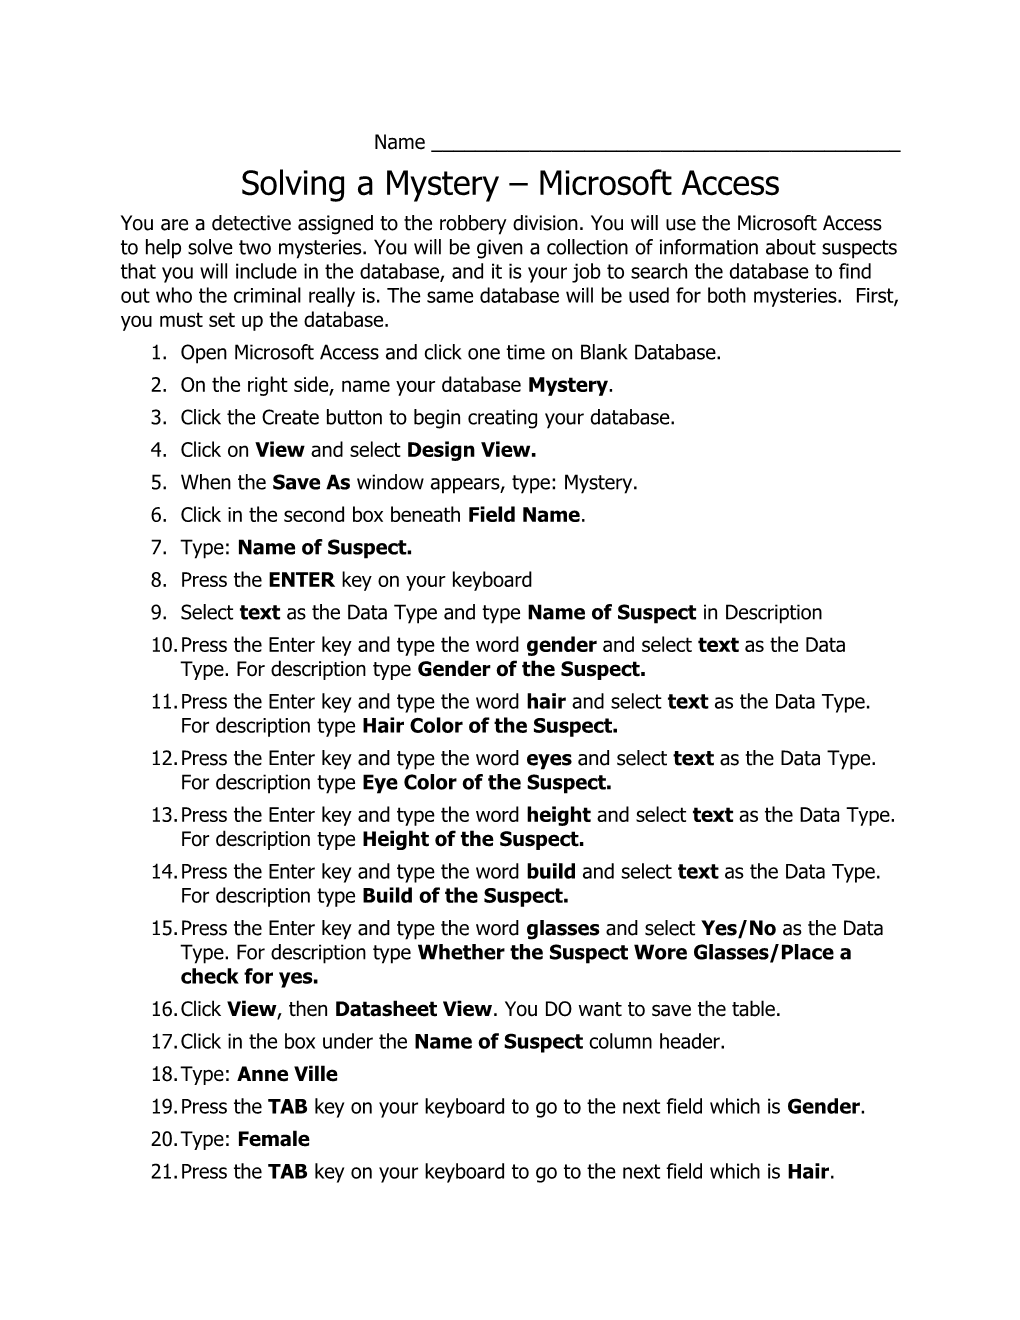 Solving a Mystery Microsoft Access